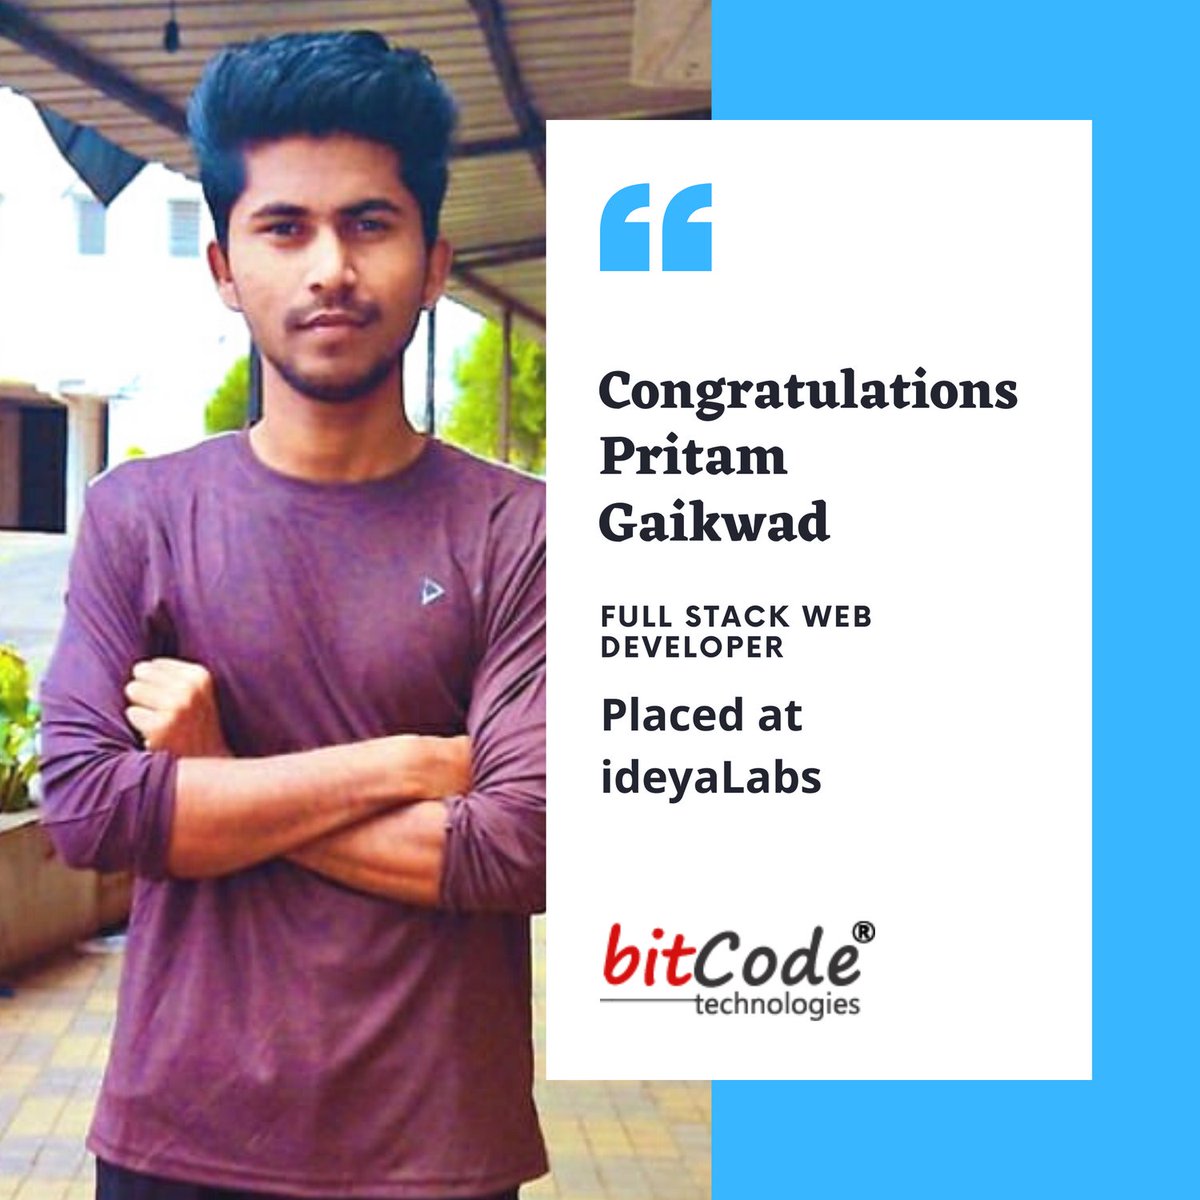 Congratulations Pritam, for your placement at #IdeyaLabs as #FullStackWebDeveloper. We wish you all the best!

For details visit:
bit.ly/mean-stack-tra…

#bitcode #bitcodeplacements  #meanstacktraining #fullstackwebdevelopment #meanstackplacements #meanstackjobs